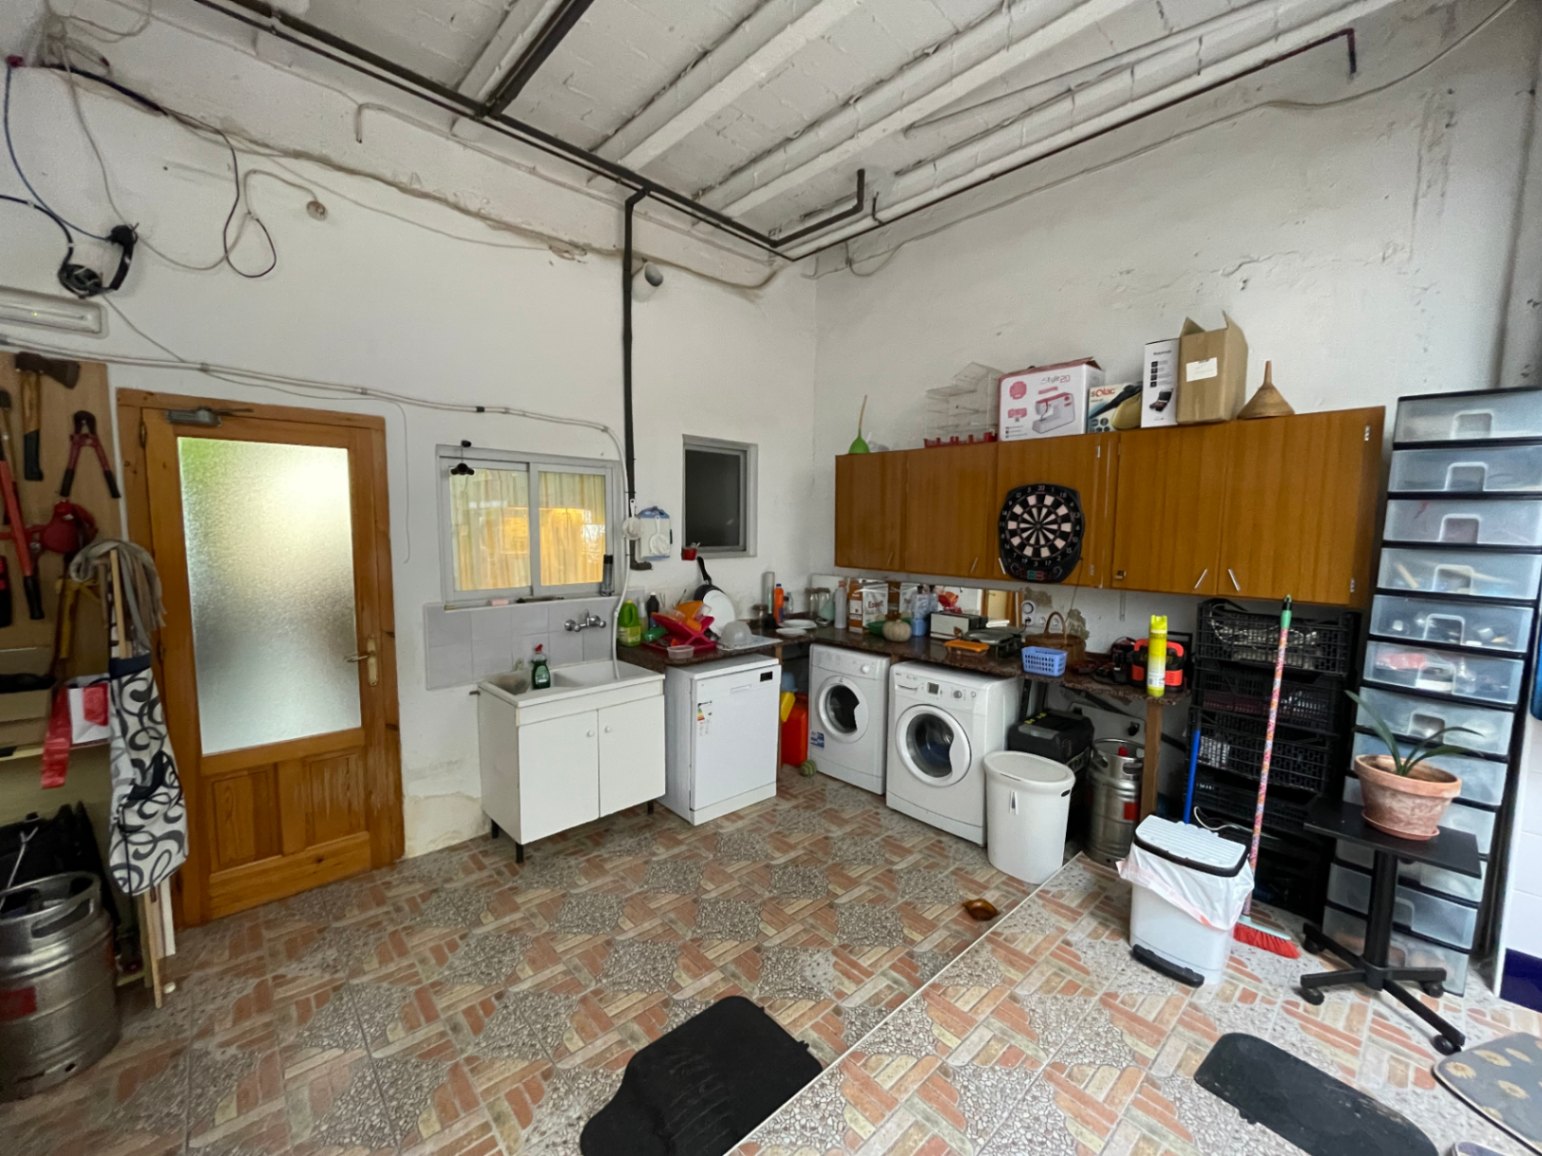 Sale of town house in Pego